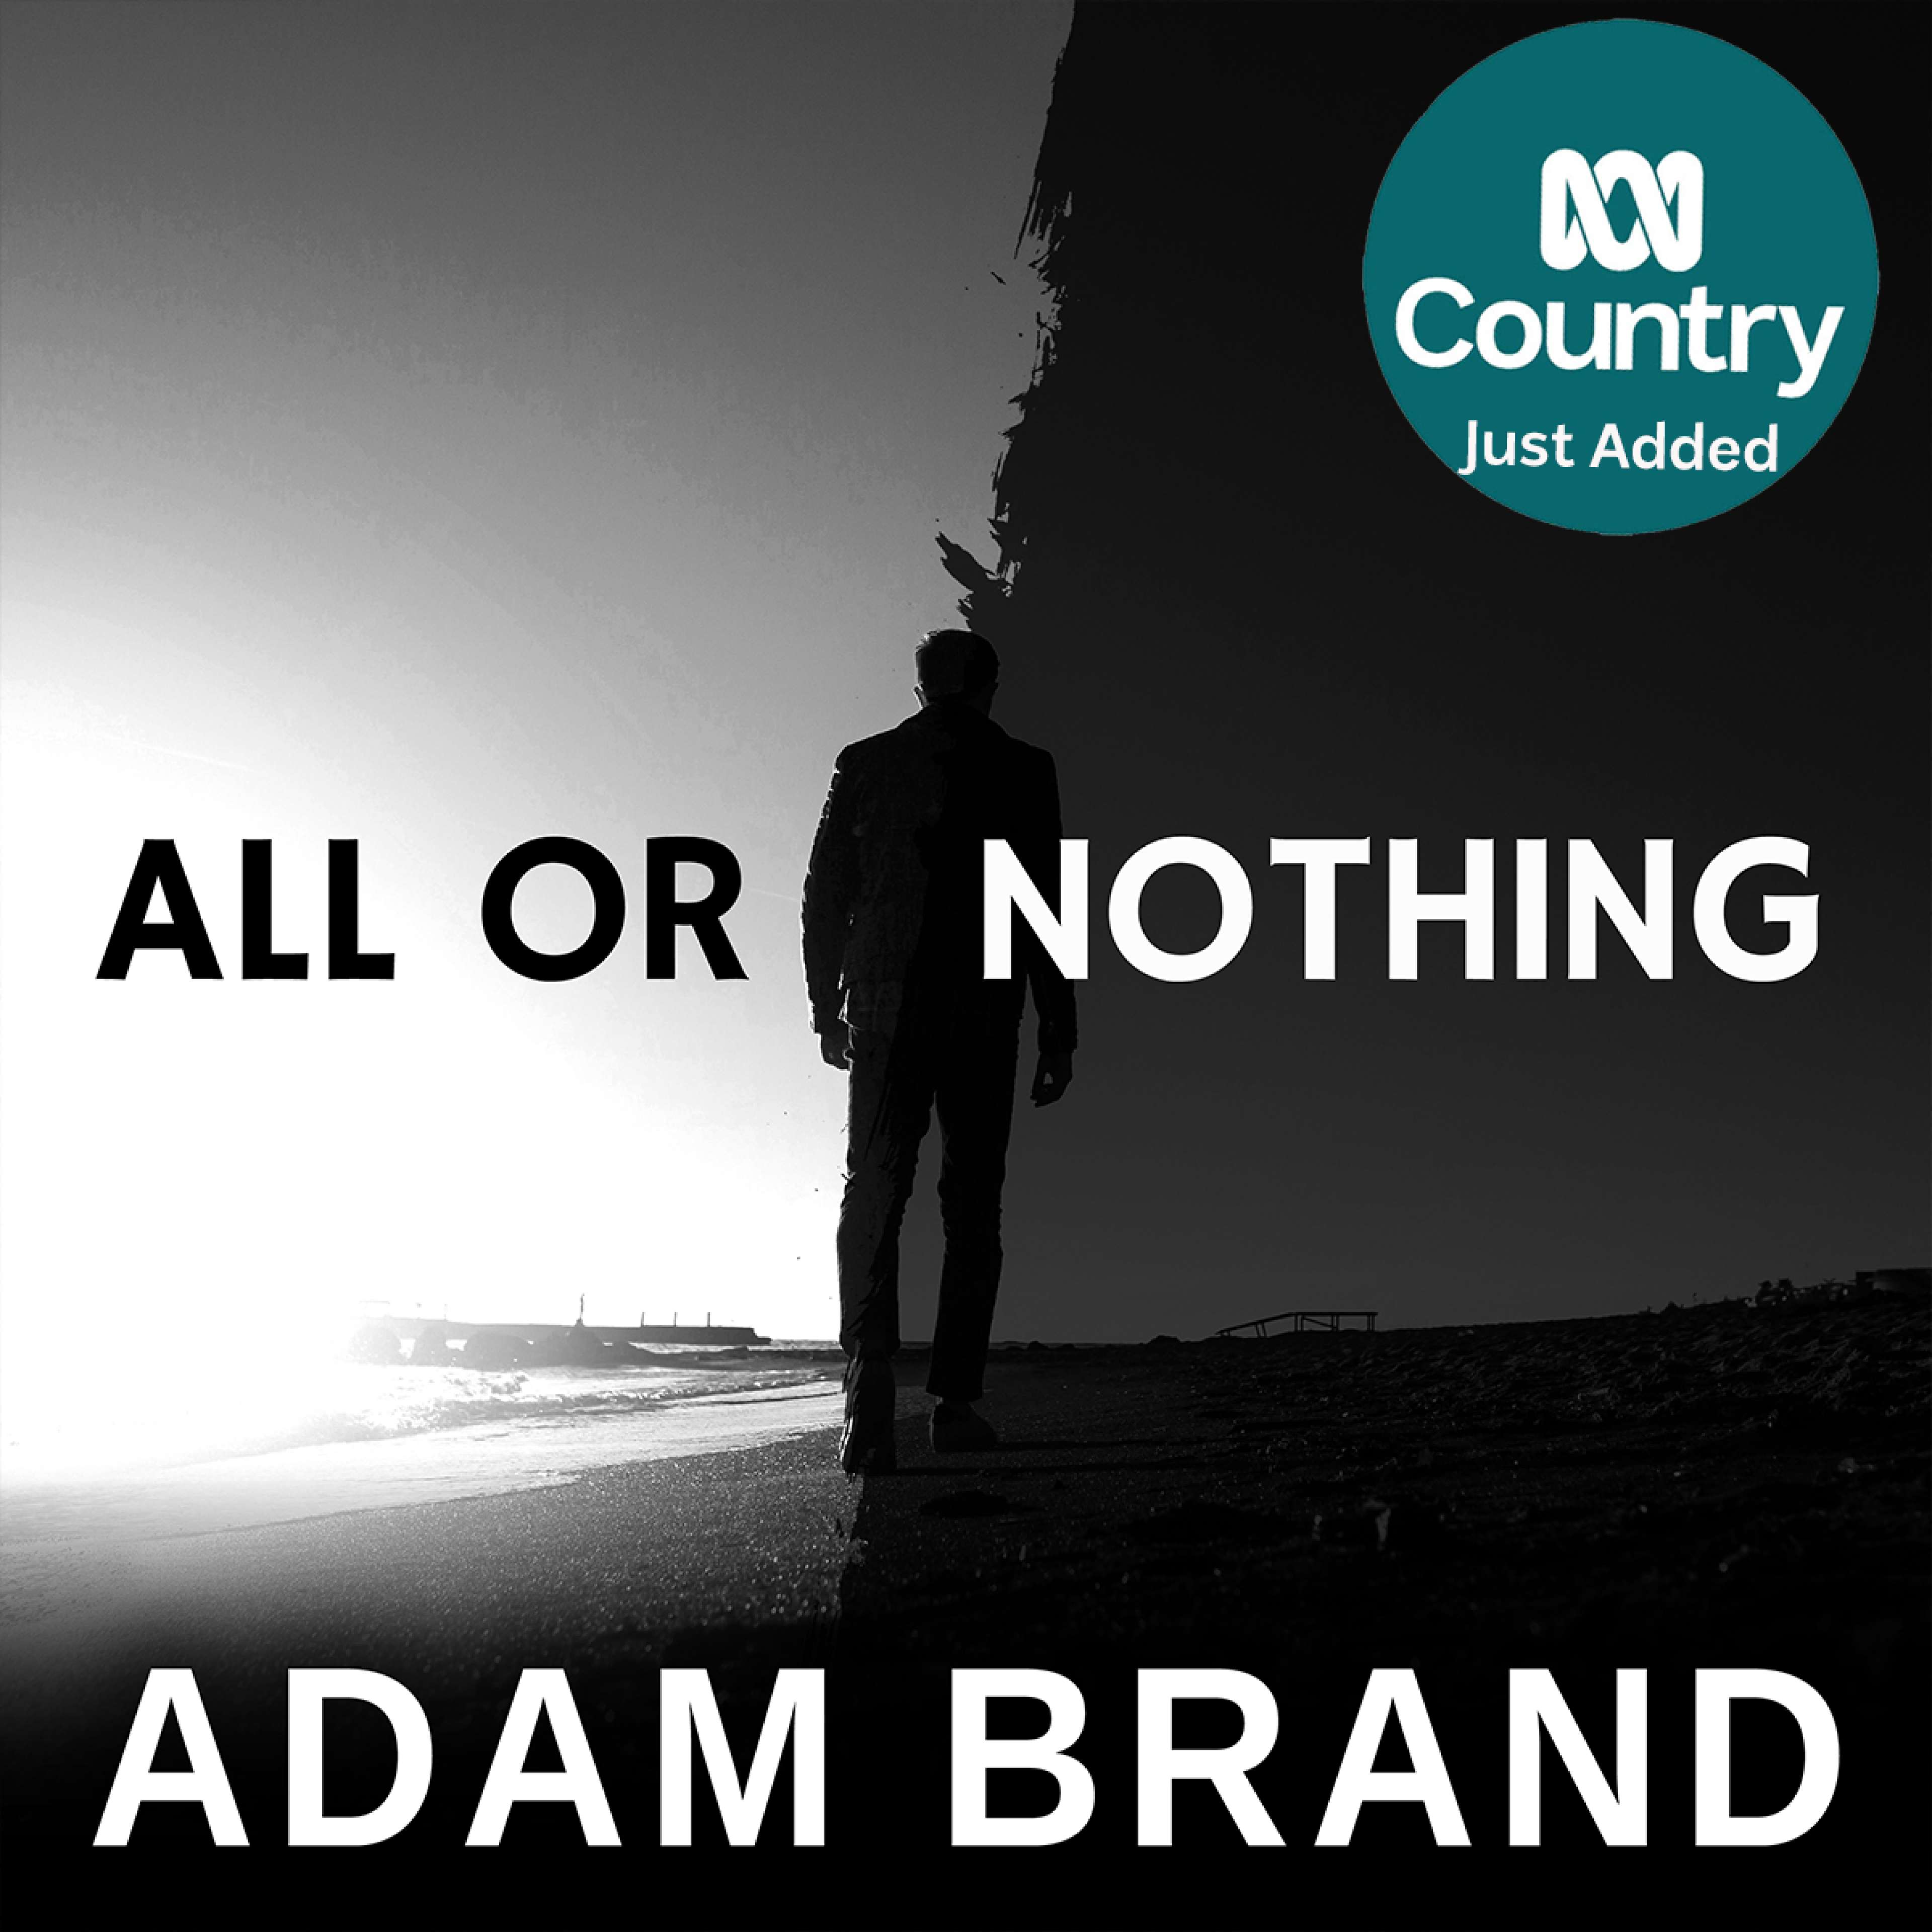 Adam Brand - 'All Or Nothing' Added ATB to ABC Country